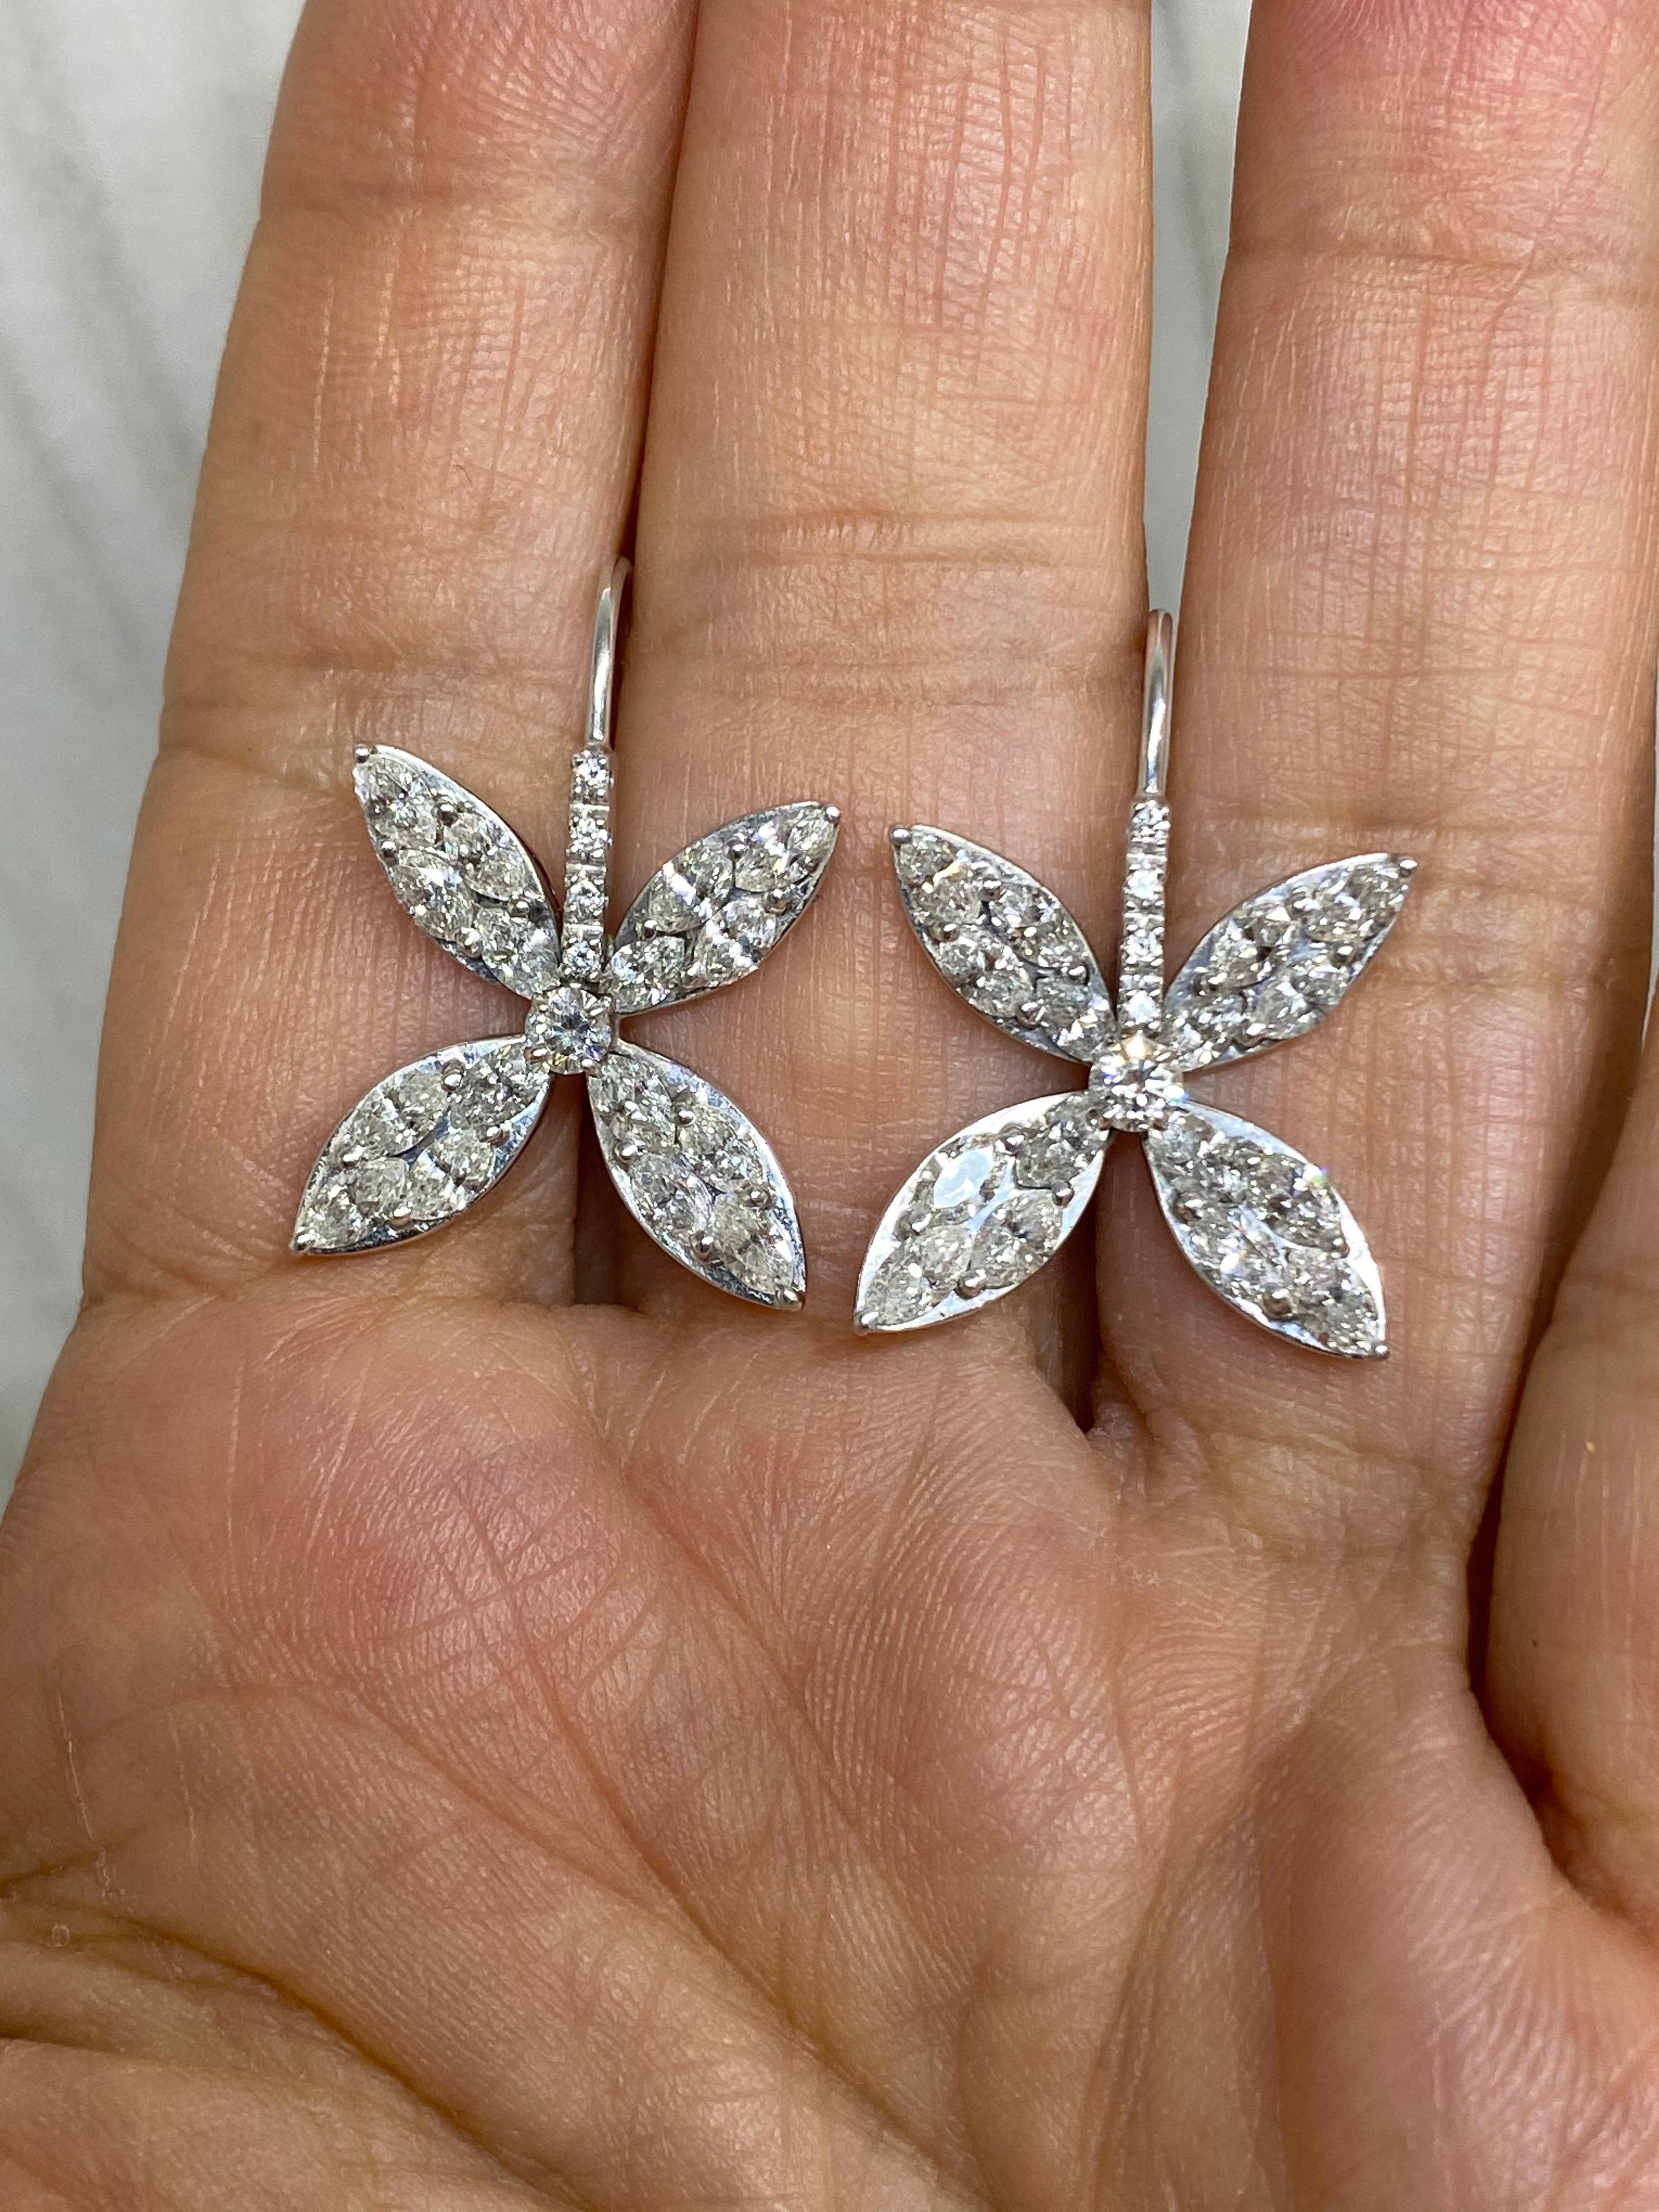 Perfect for everyday & dress up. Comfortable, Classic and dazzling. 
32 Marquise and 10 brilliant cut diamonds set in 18k white gold create these classic and elegant petal design. Perfect for day to night.
Approx. 3.4 CTW
G-H, VS-VS2
5/8 inch long